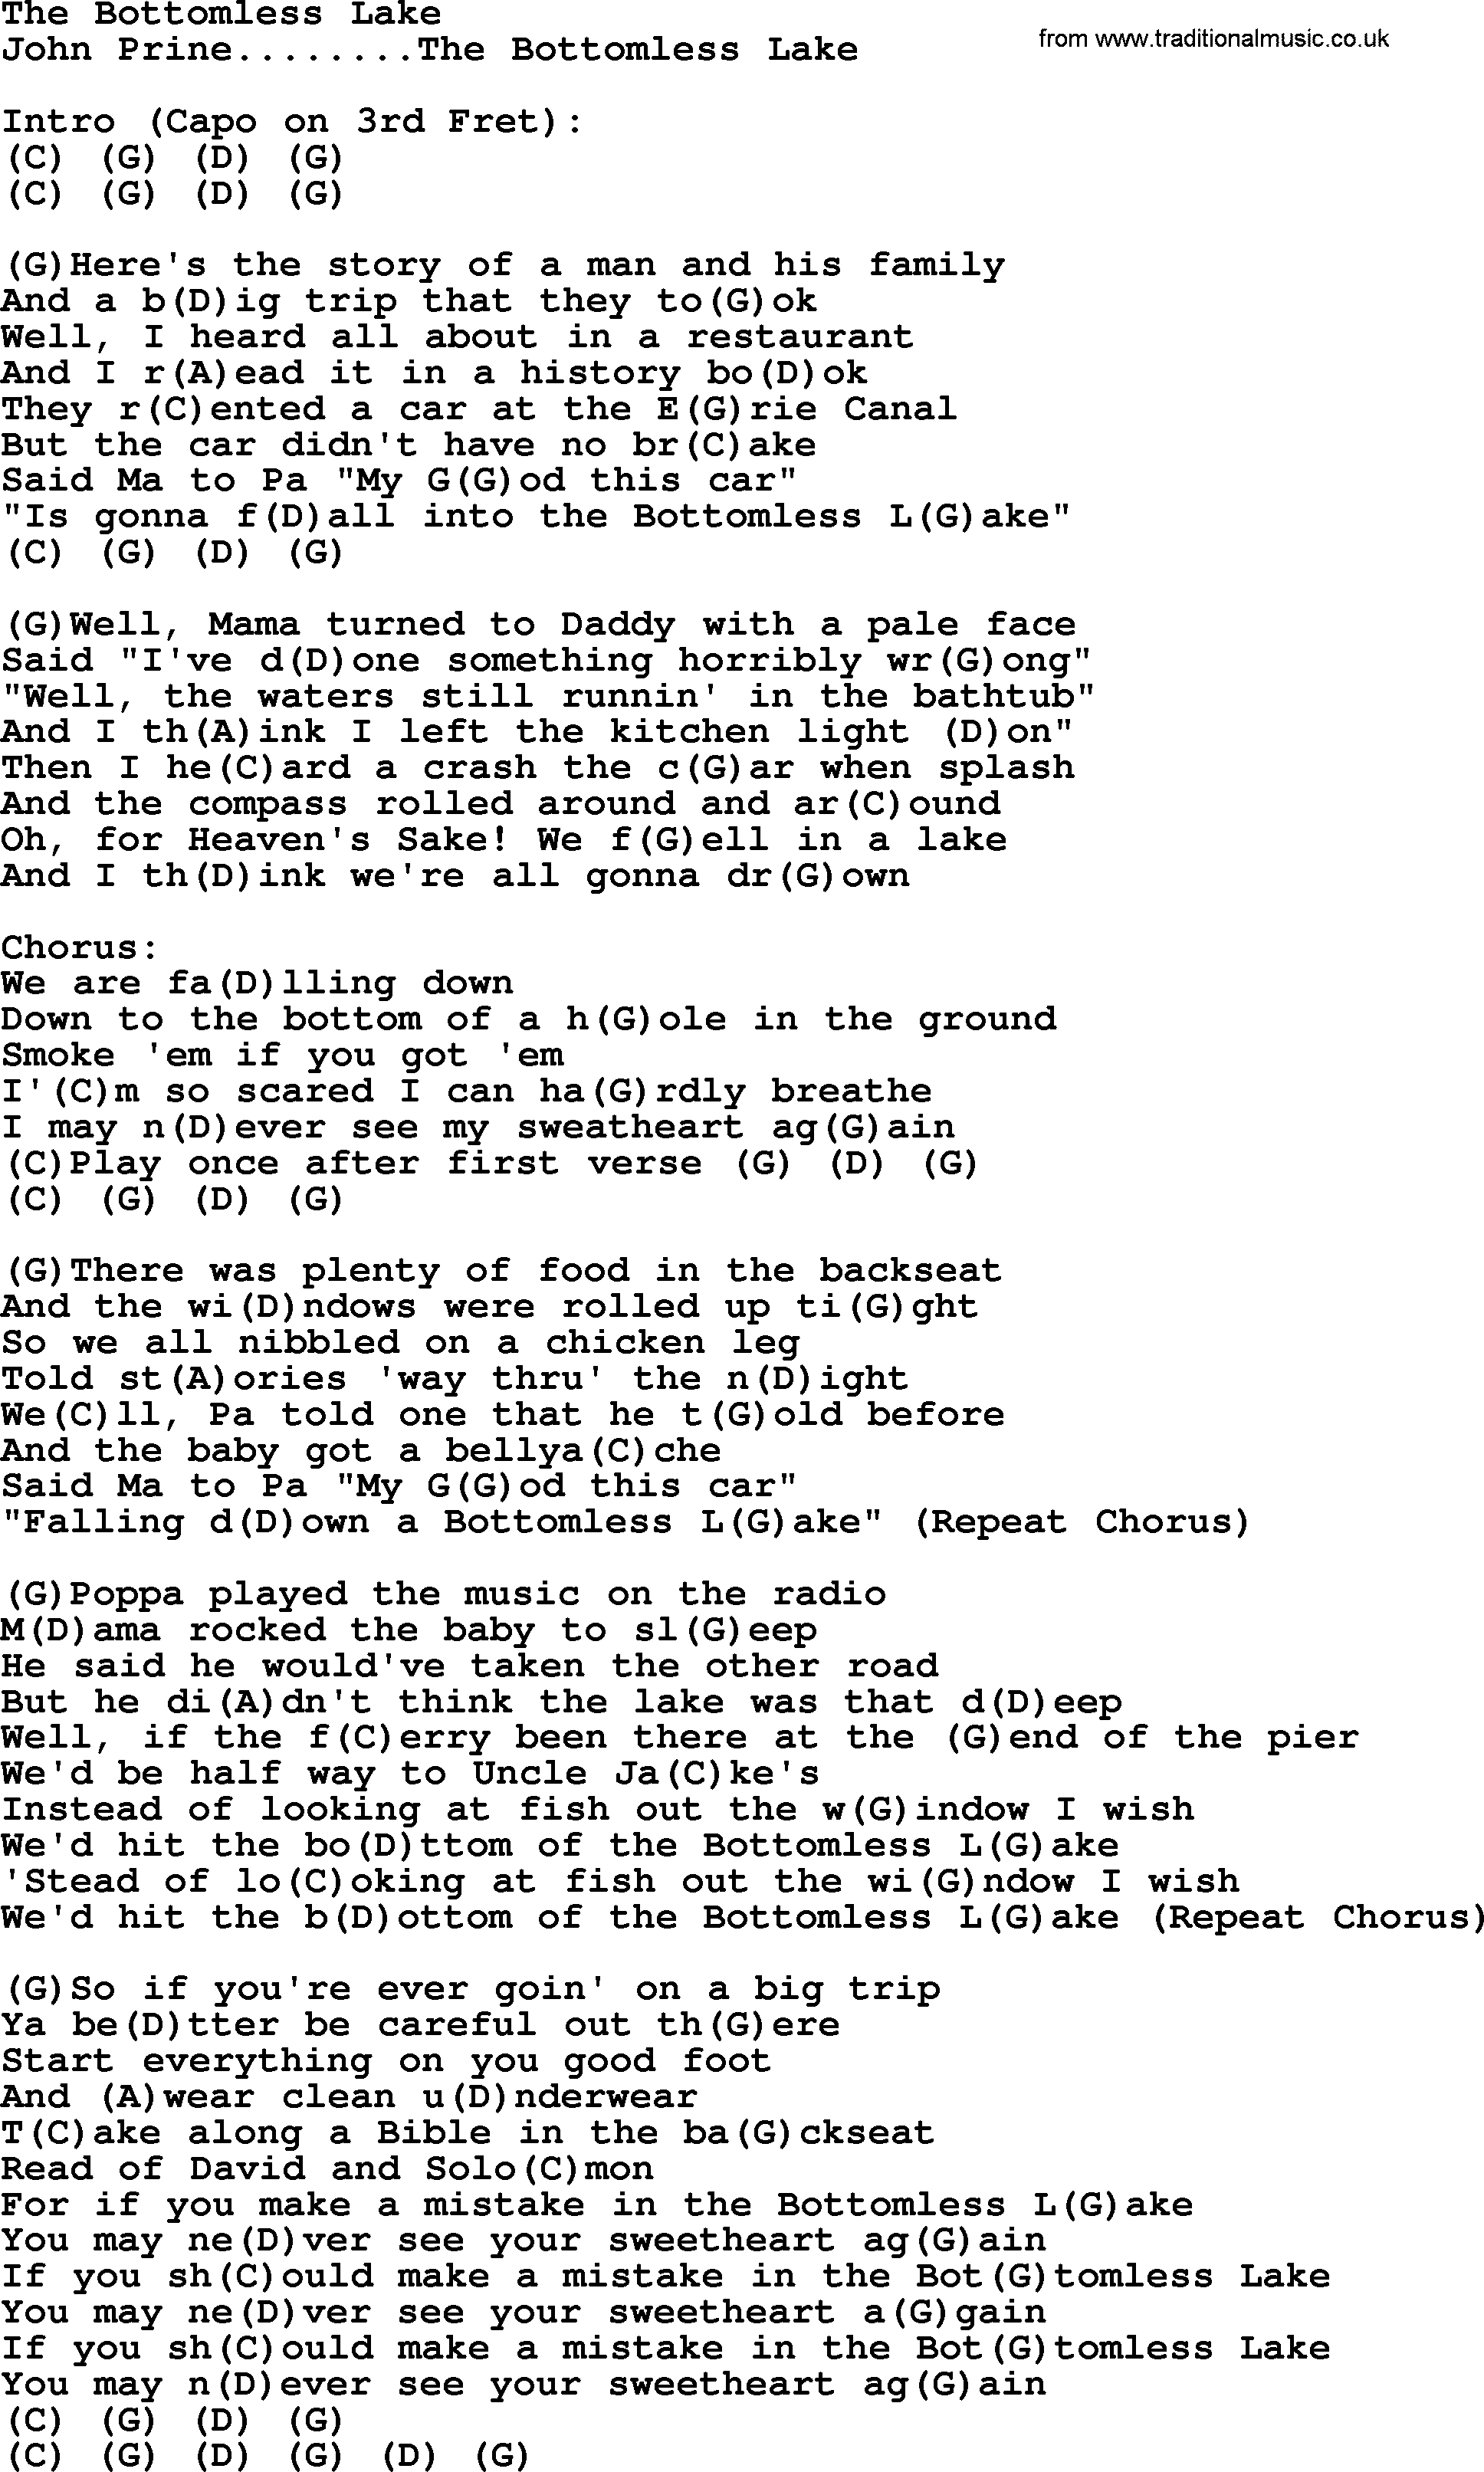 Bluegrass song: The Bottomless Lake, lyrics and chords